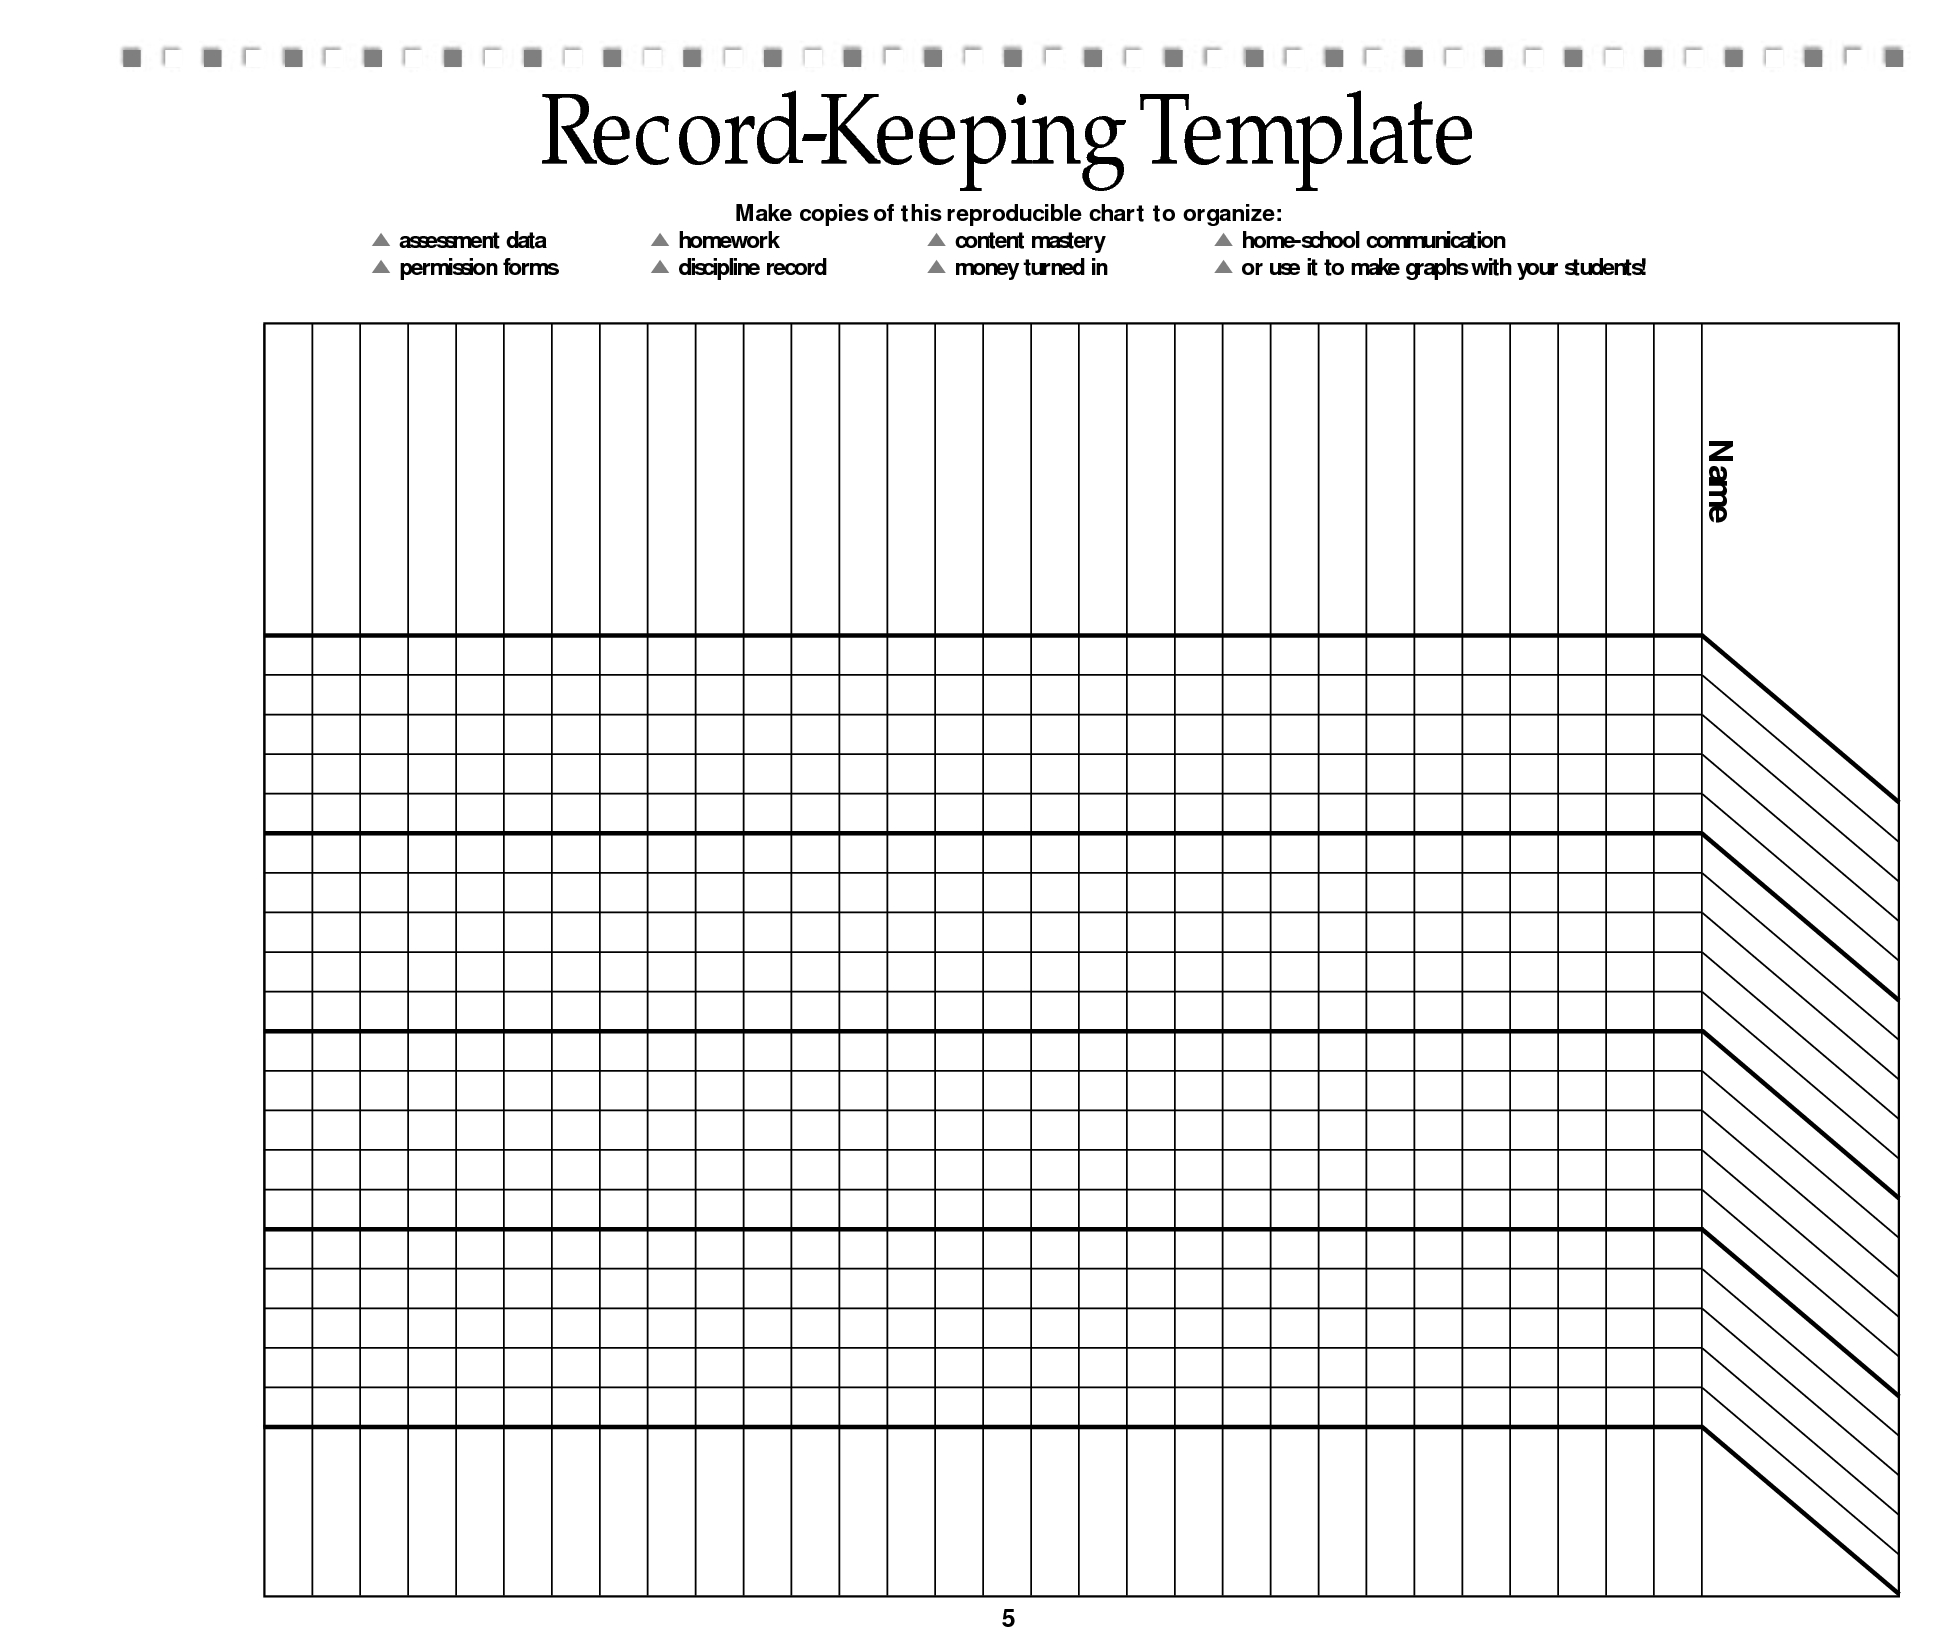 free-printable-record-keeping-forms-back-to-school-pinterest-free